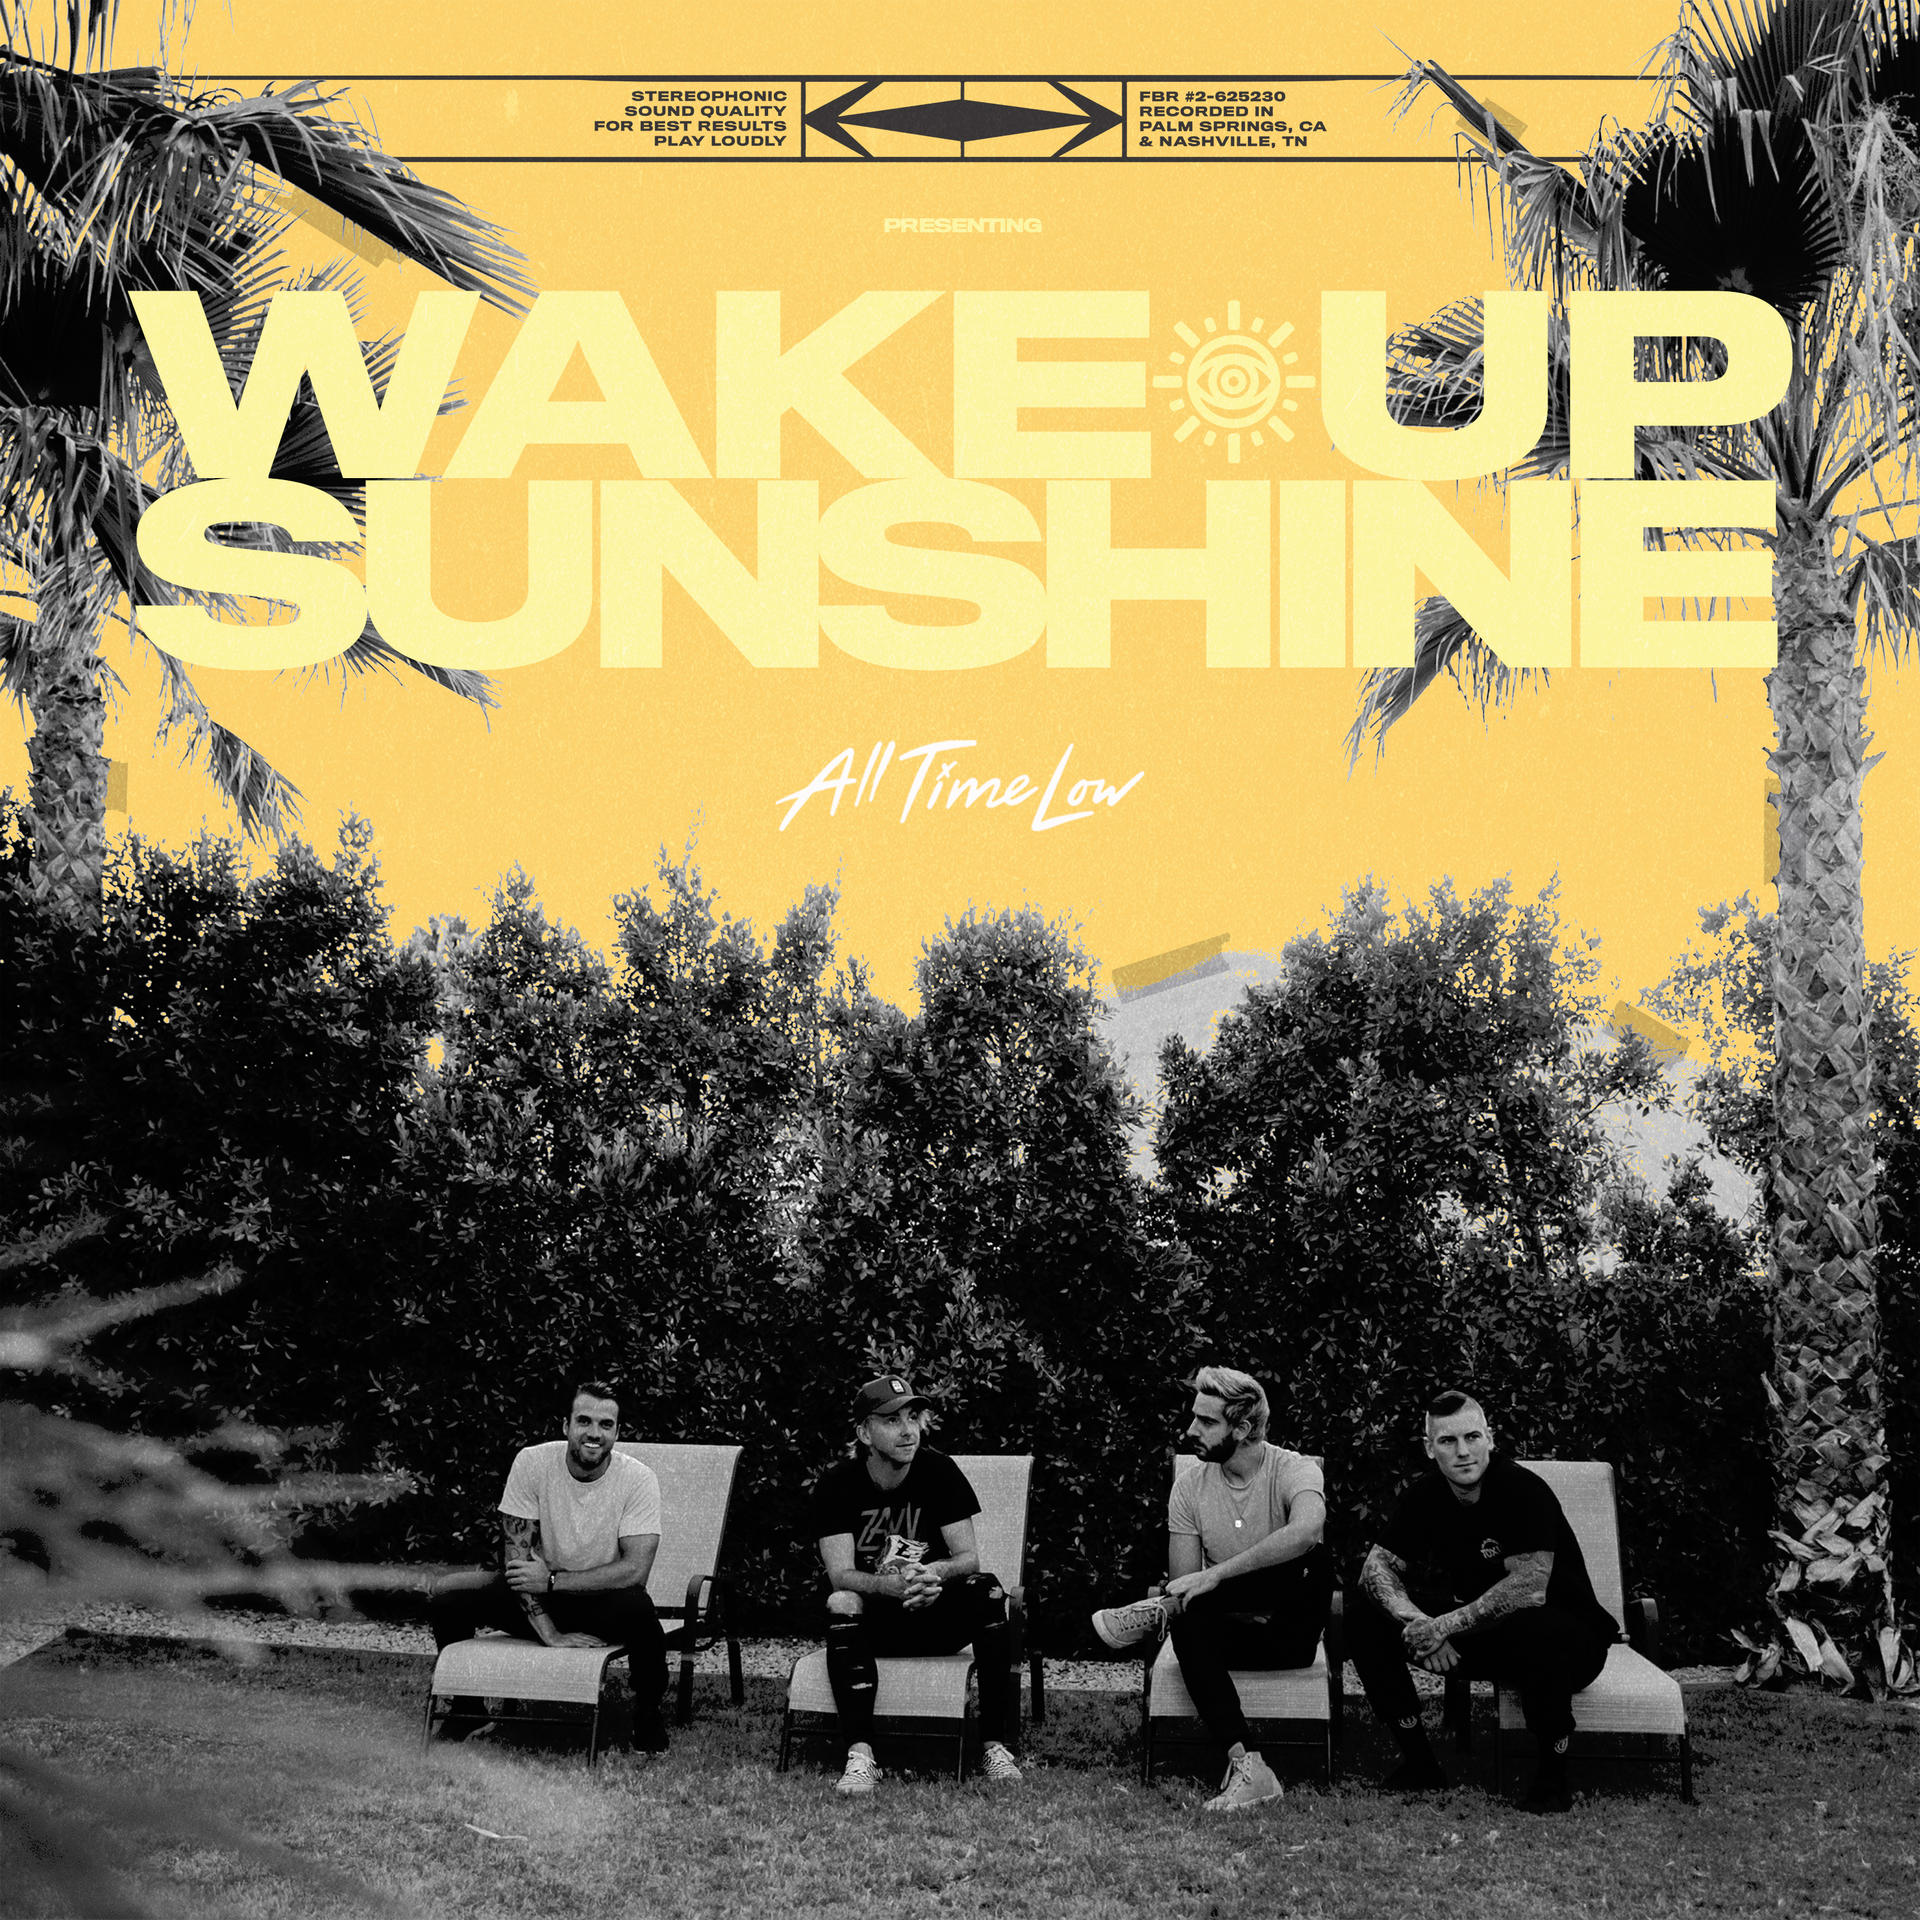 All Time Low - Wake - (CD) Up,Sunshine